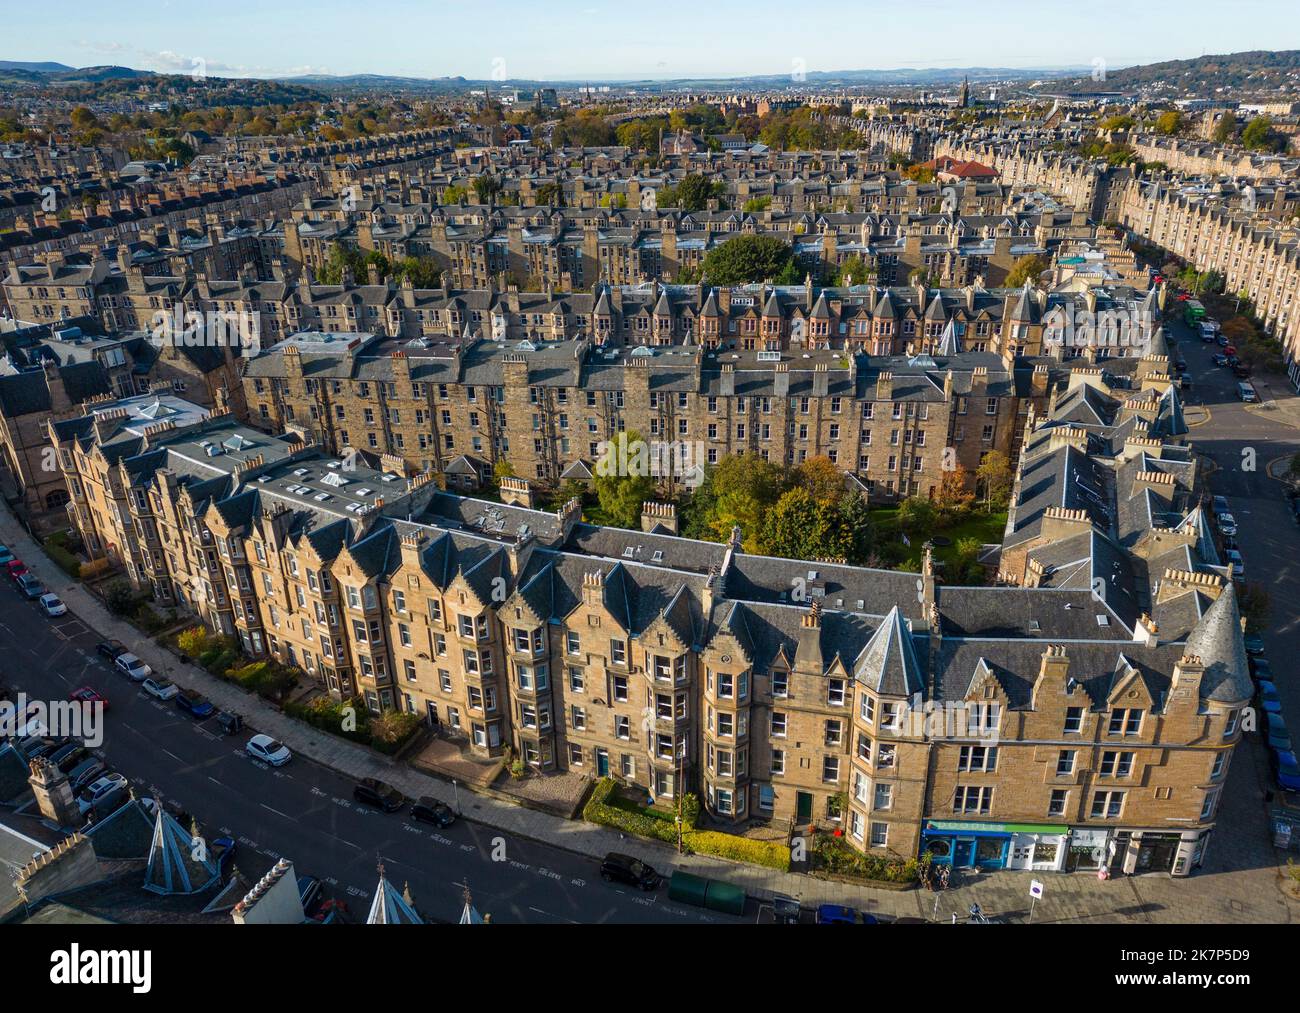 Aerial view of tenement houses in upmarket residential district of Marchmont in Edinburgh, Scotland, UK Stock Photo